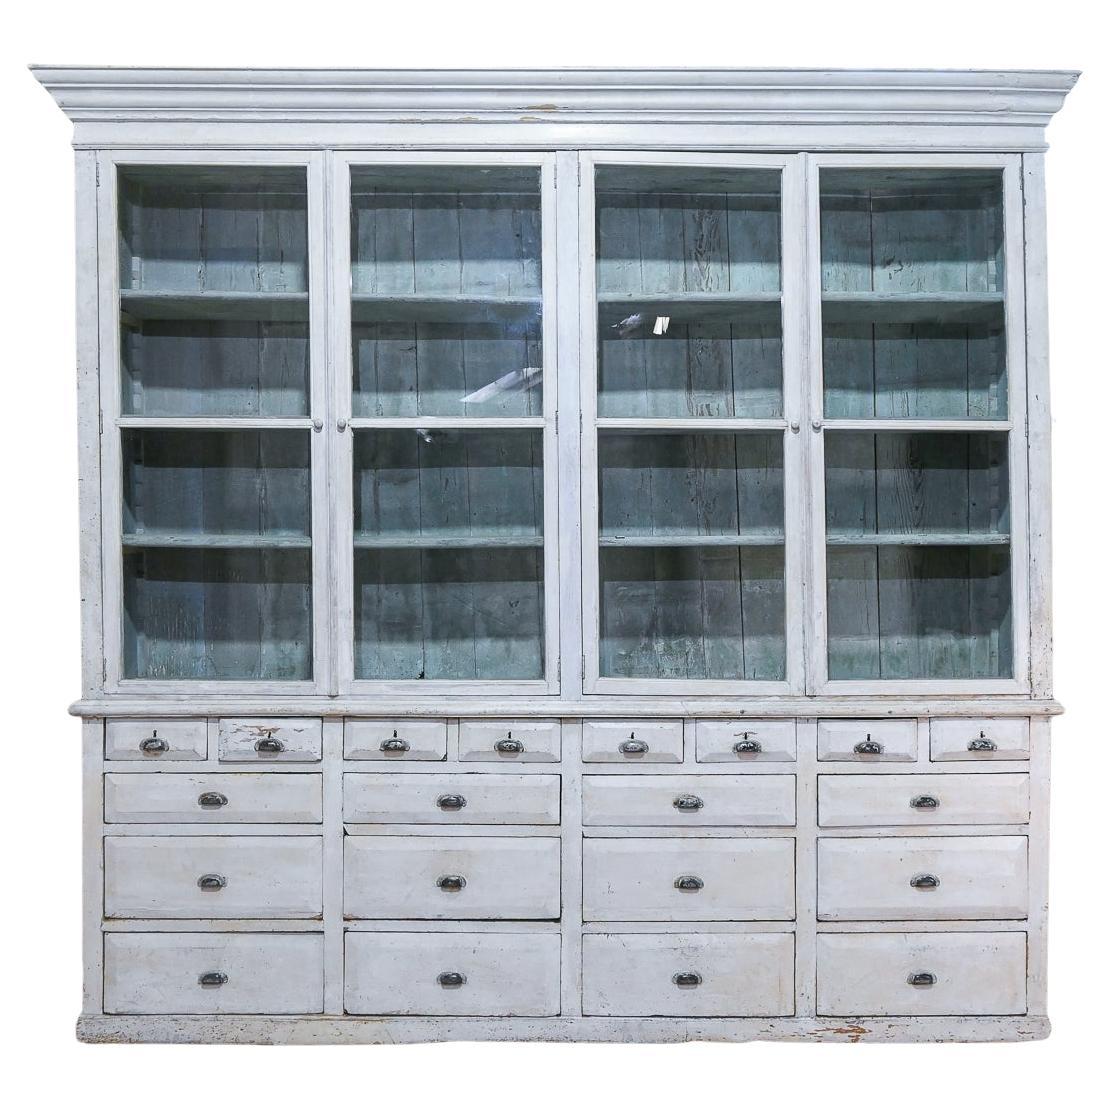 A Large Scale 19th Century French Painted Glazed Bibliothèque Cabinet - Bookcase